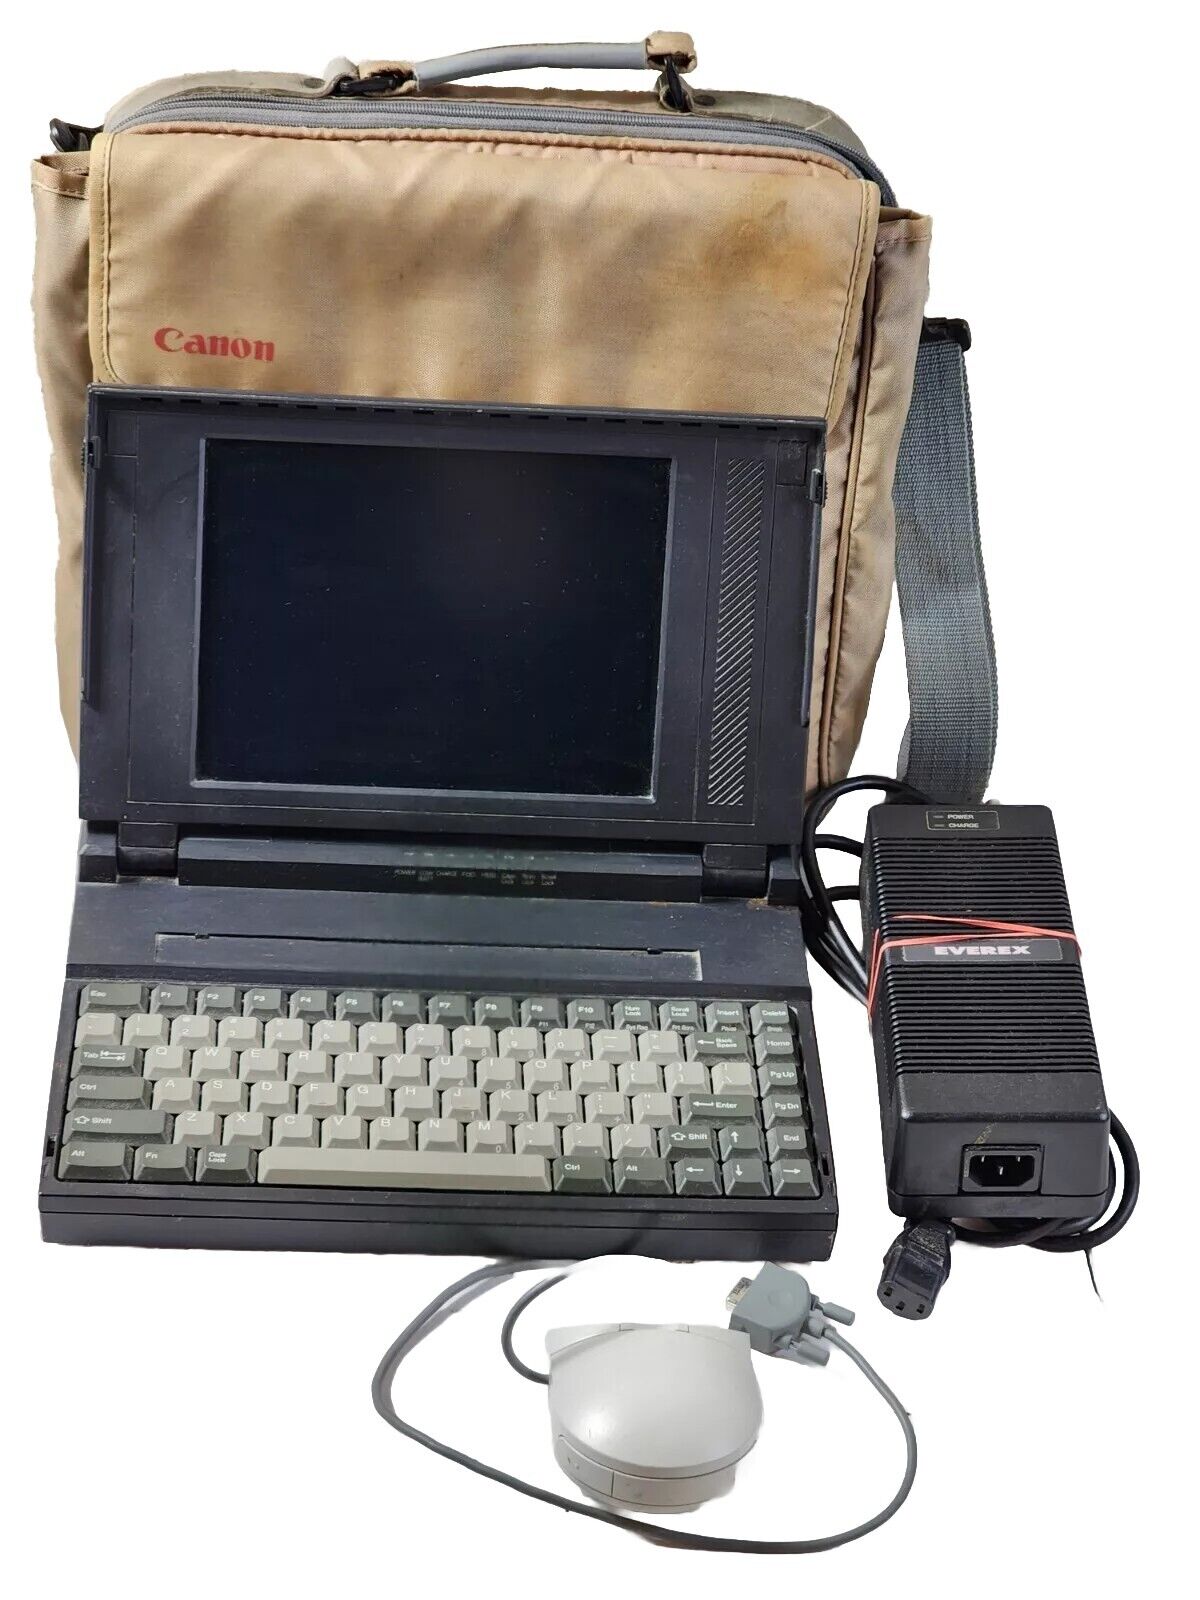 Vintage EVEREX Tempo LX 386 Laptop Computer (Sold As Is Parts Only)